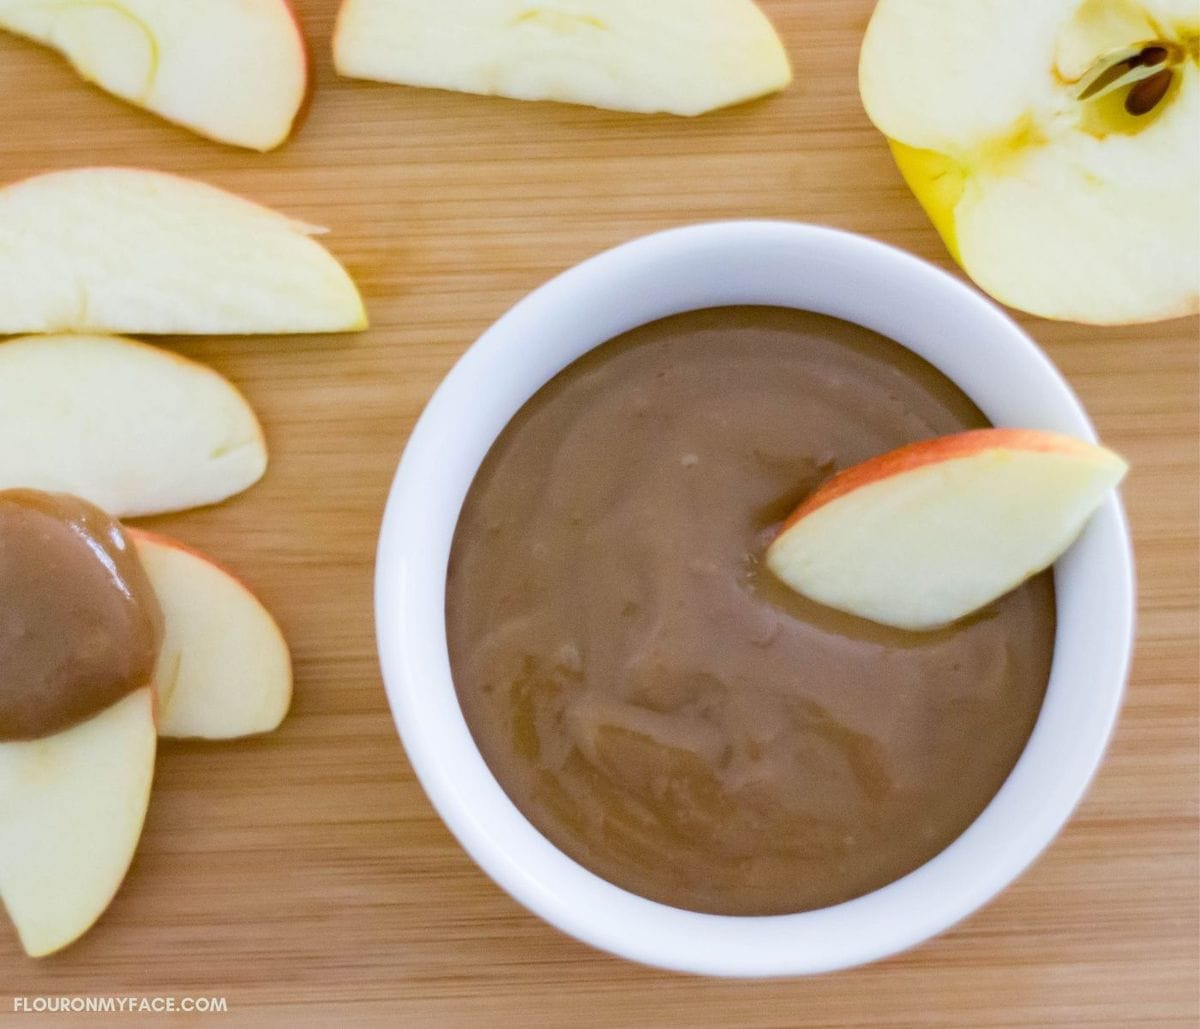 Apple dip in a small serving bowl.